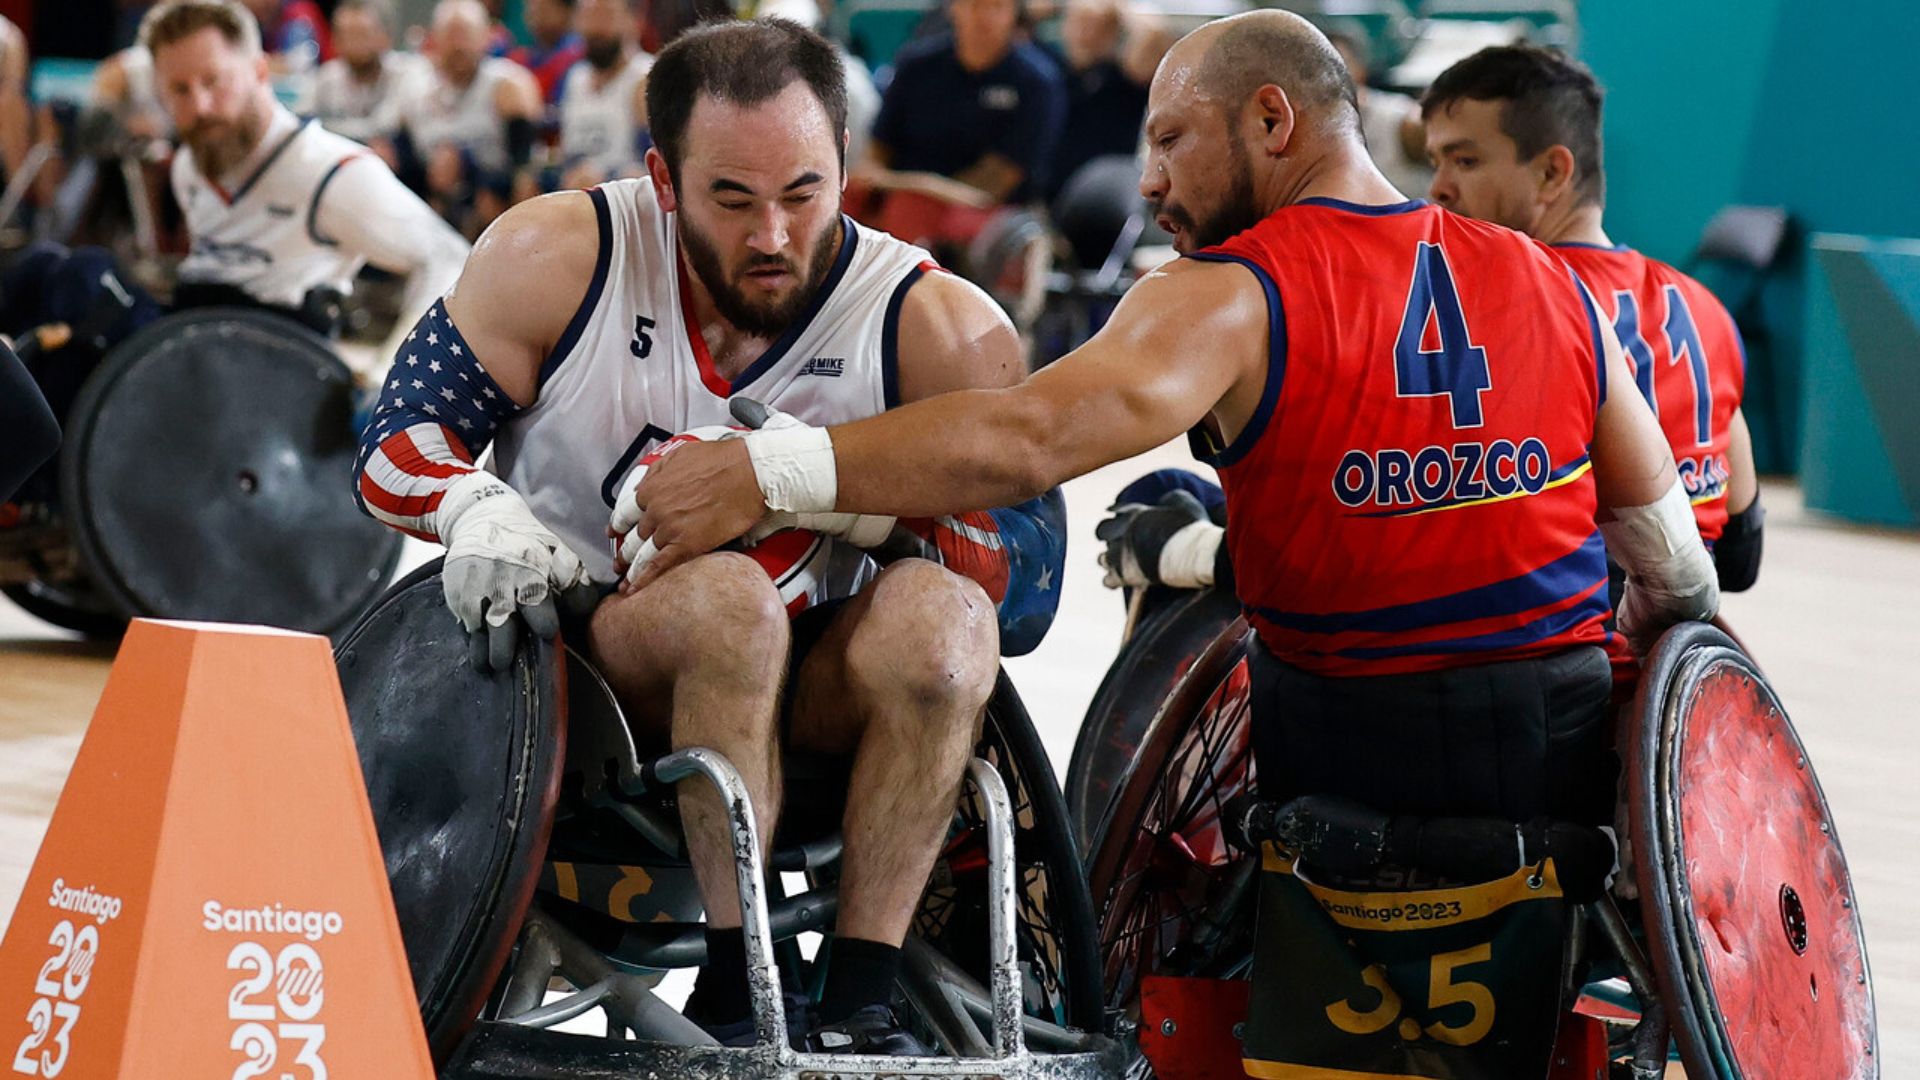 The United States Is Aiming for Gold in Wheelchair Rugby